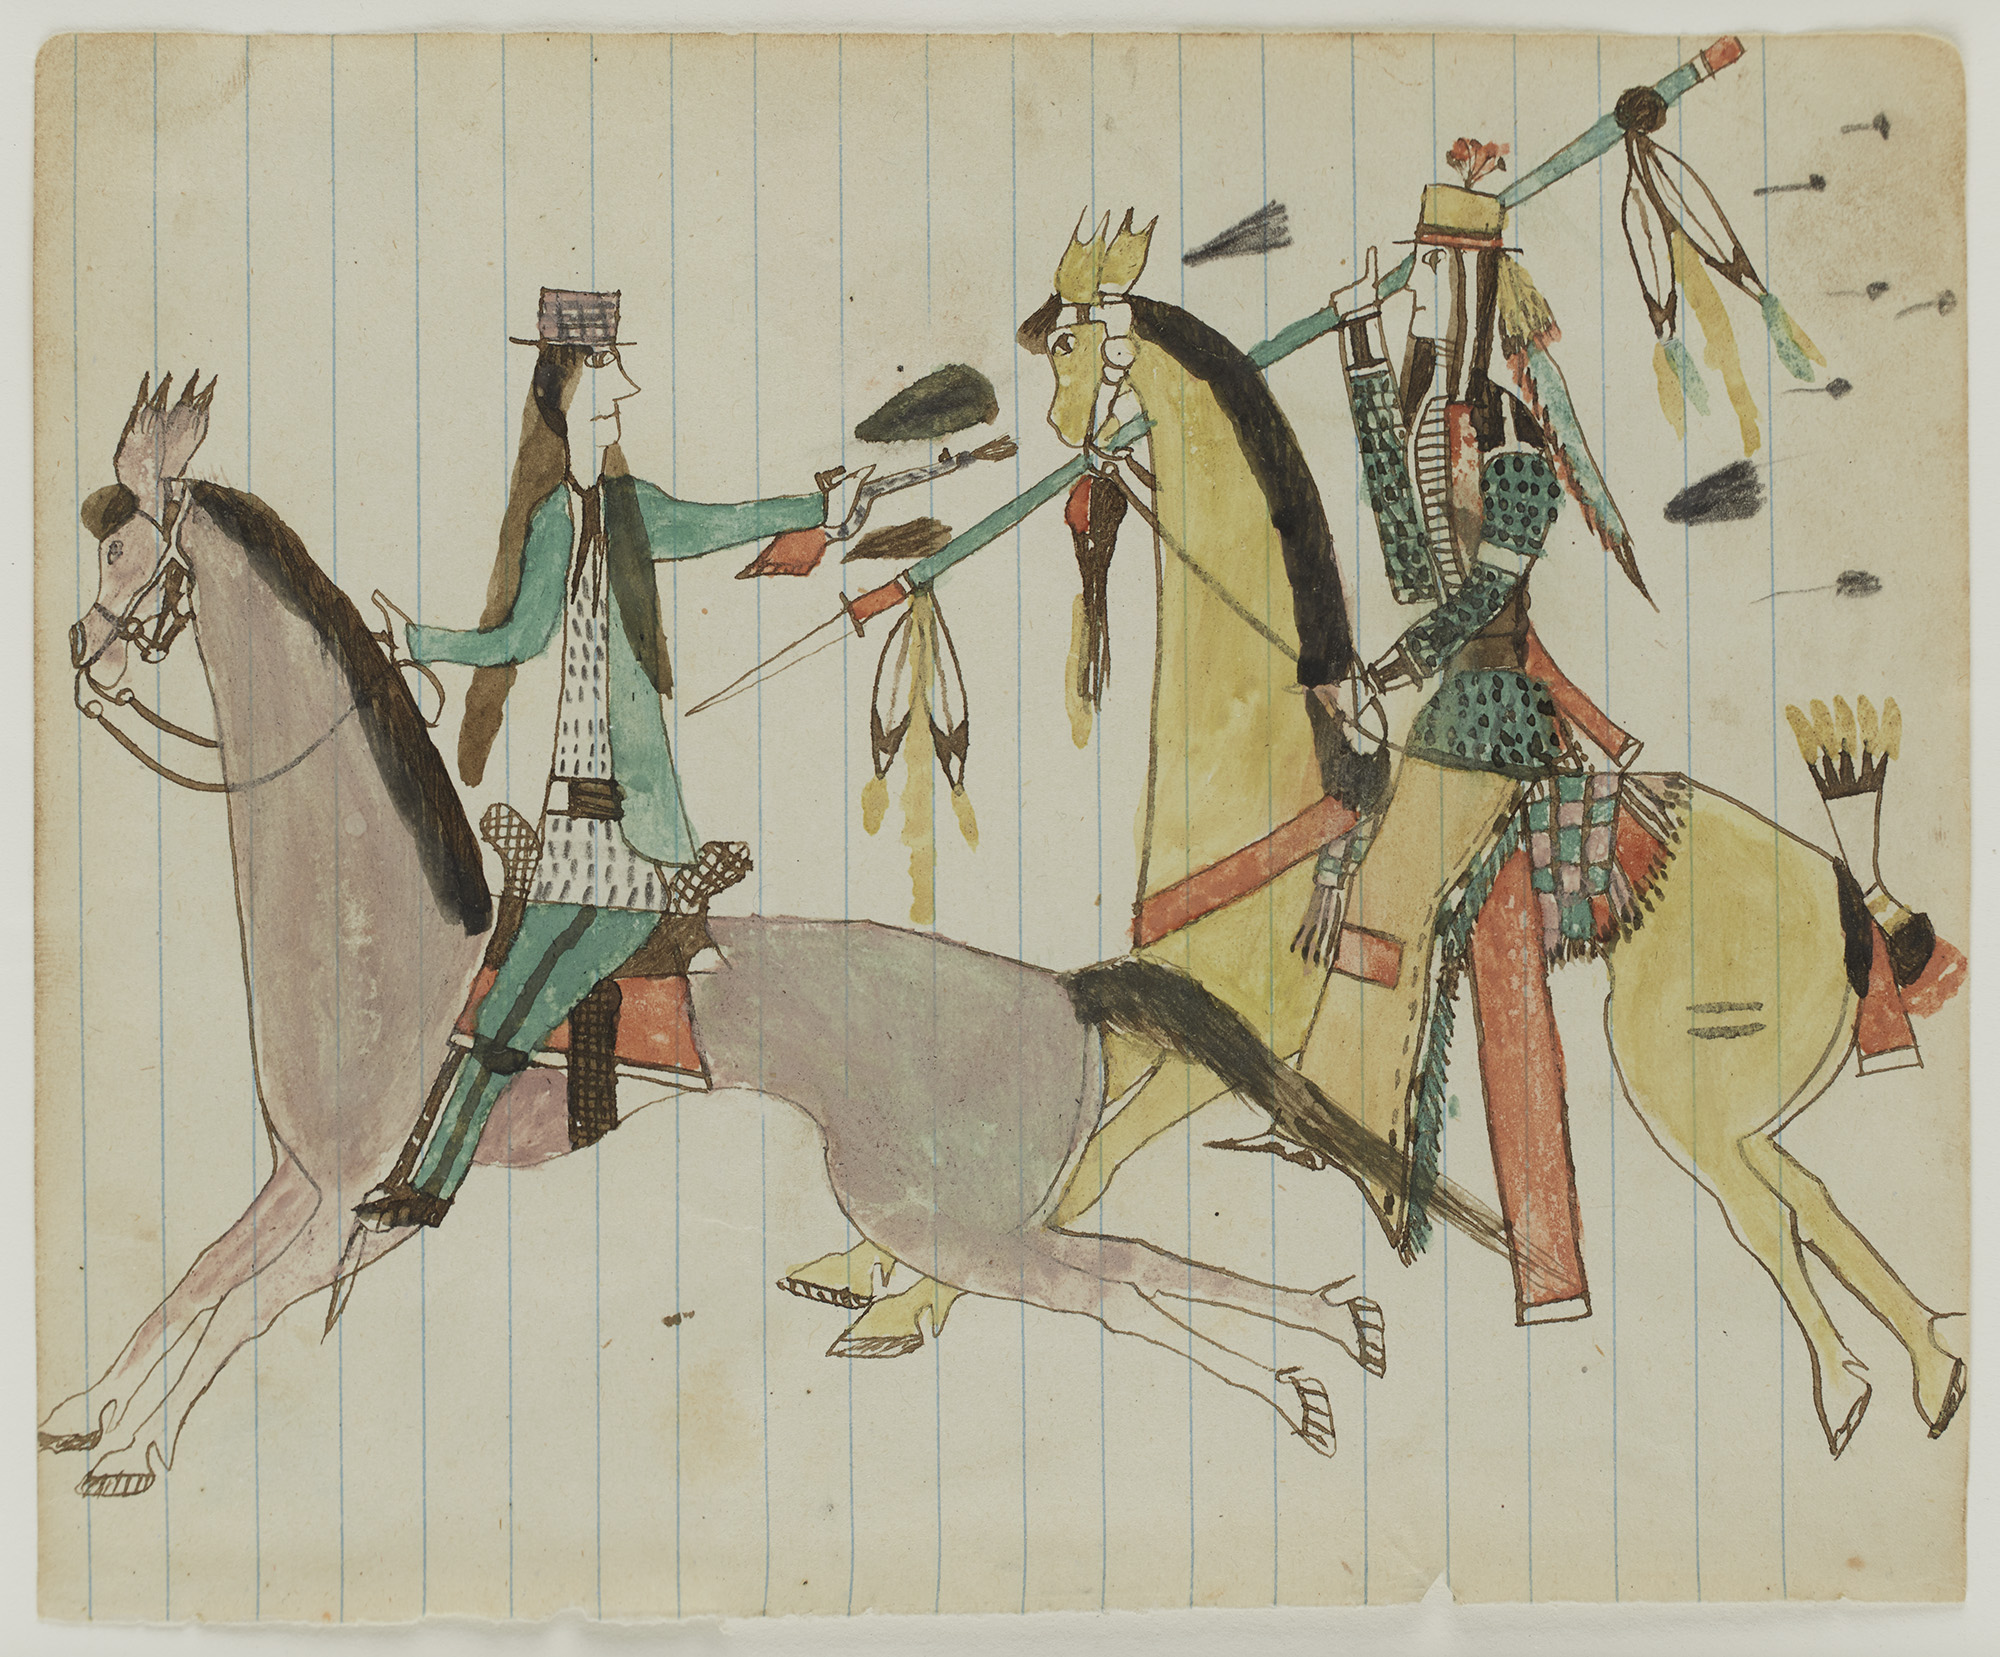 Drawing attributed to Howling Wolf (Honanistto). Photo by Martin Parsekian.